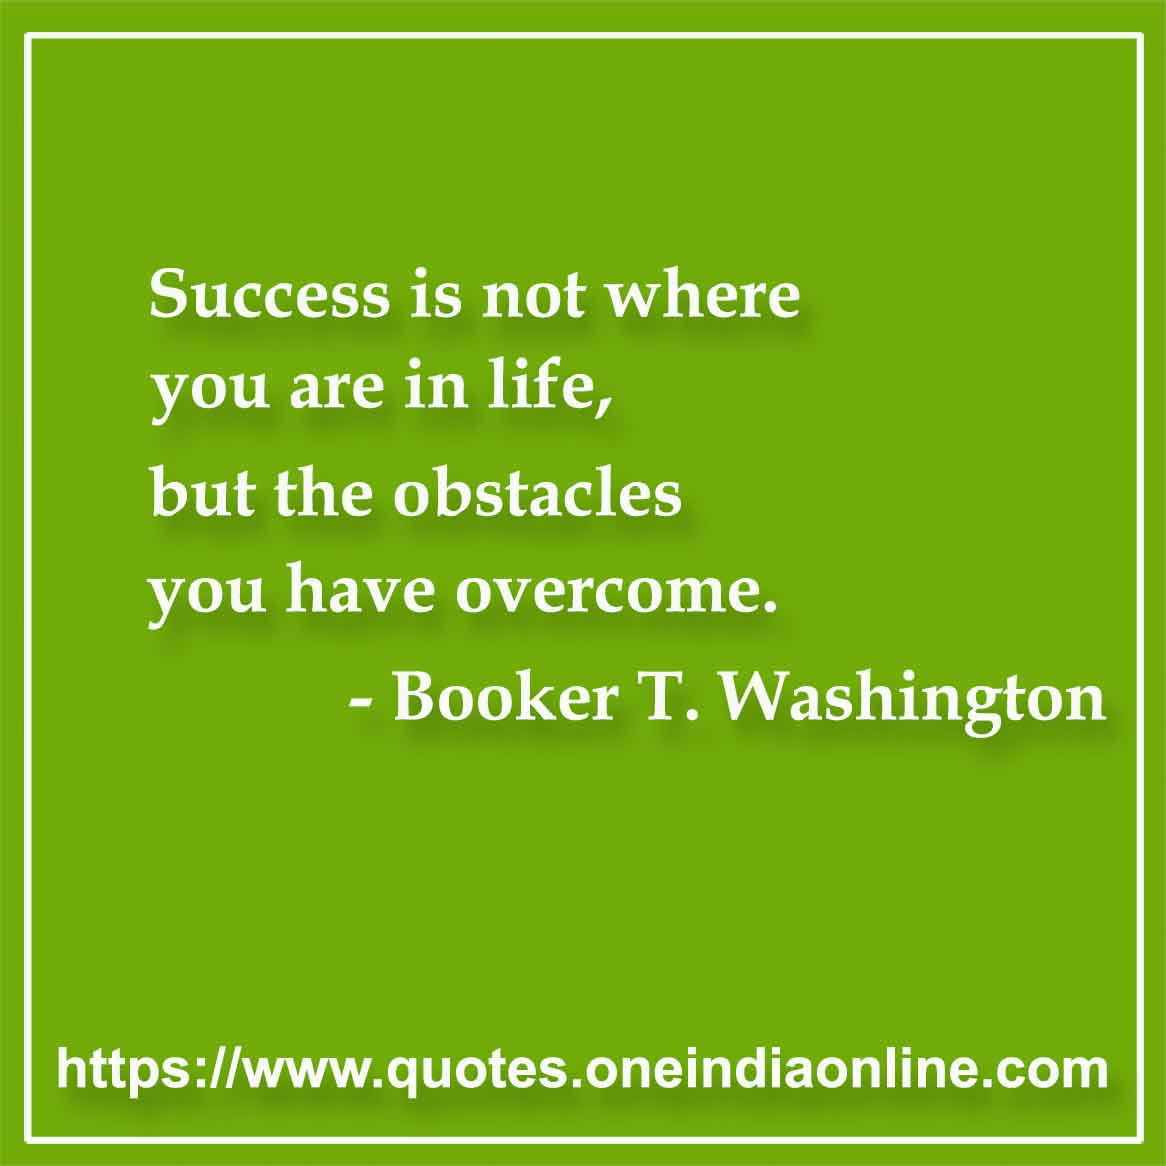 Success is not where you are in life, but the obstacles you have overcome.

- Success Sayings by Booker T. Washington